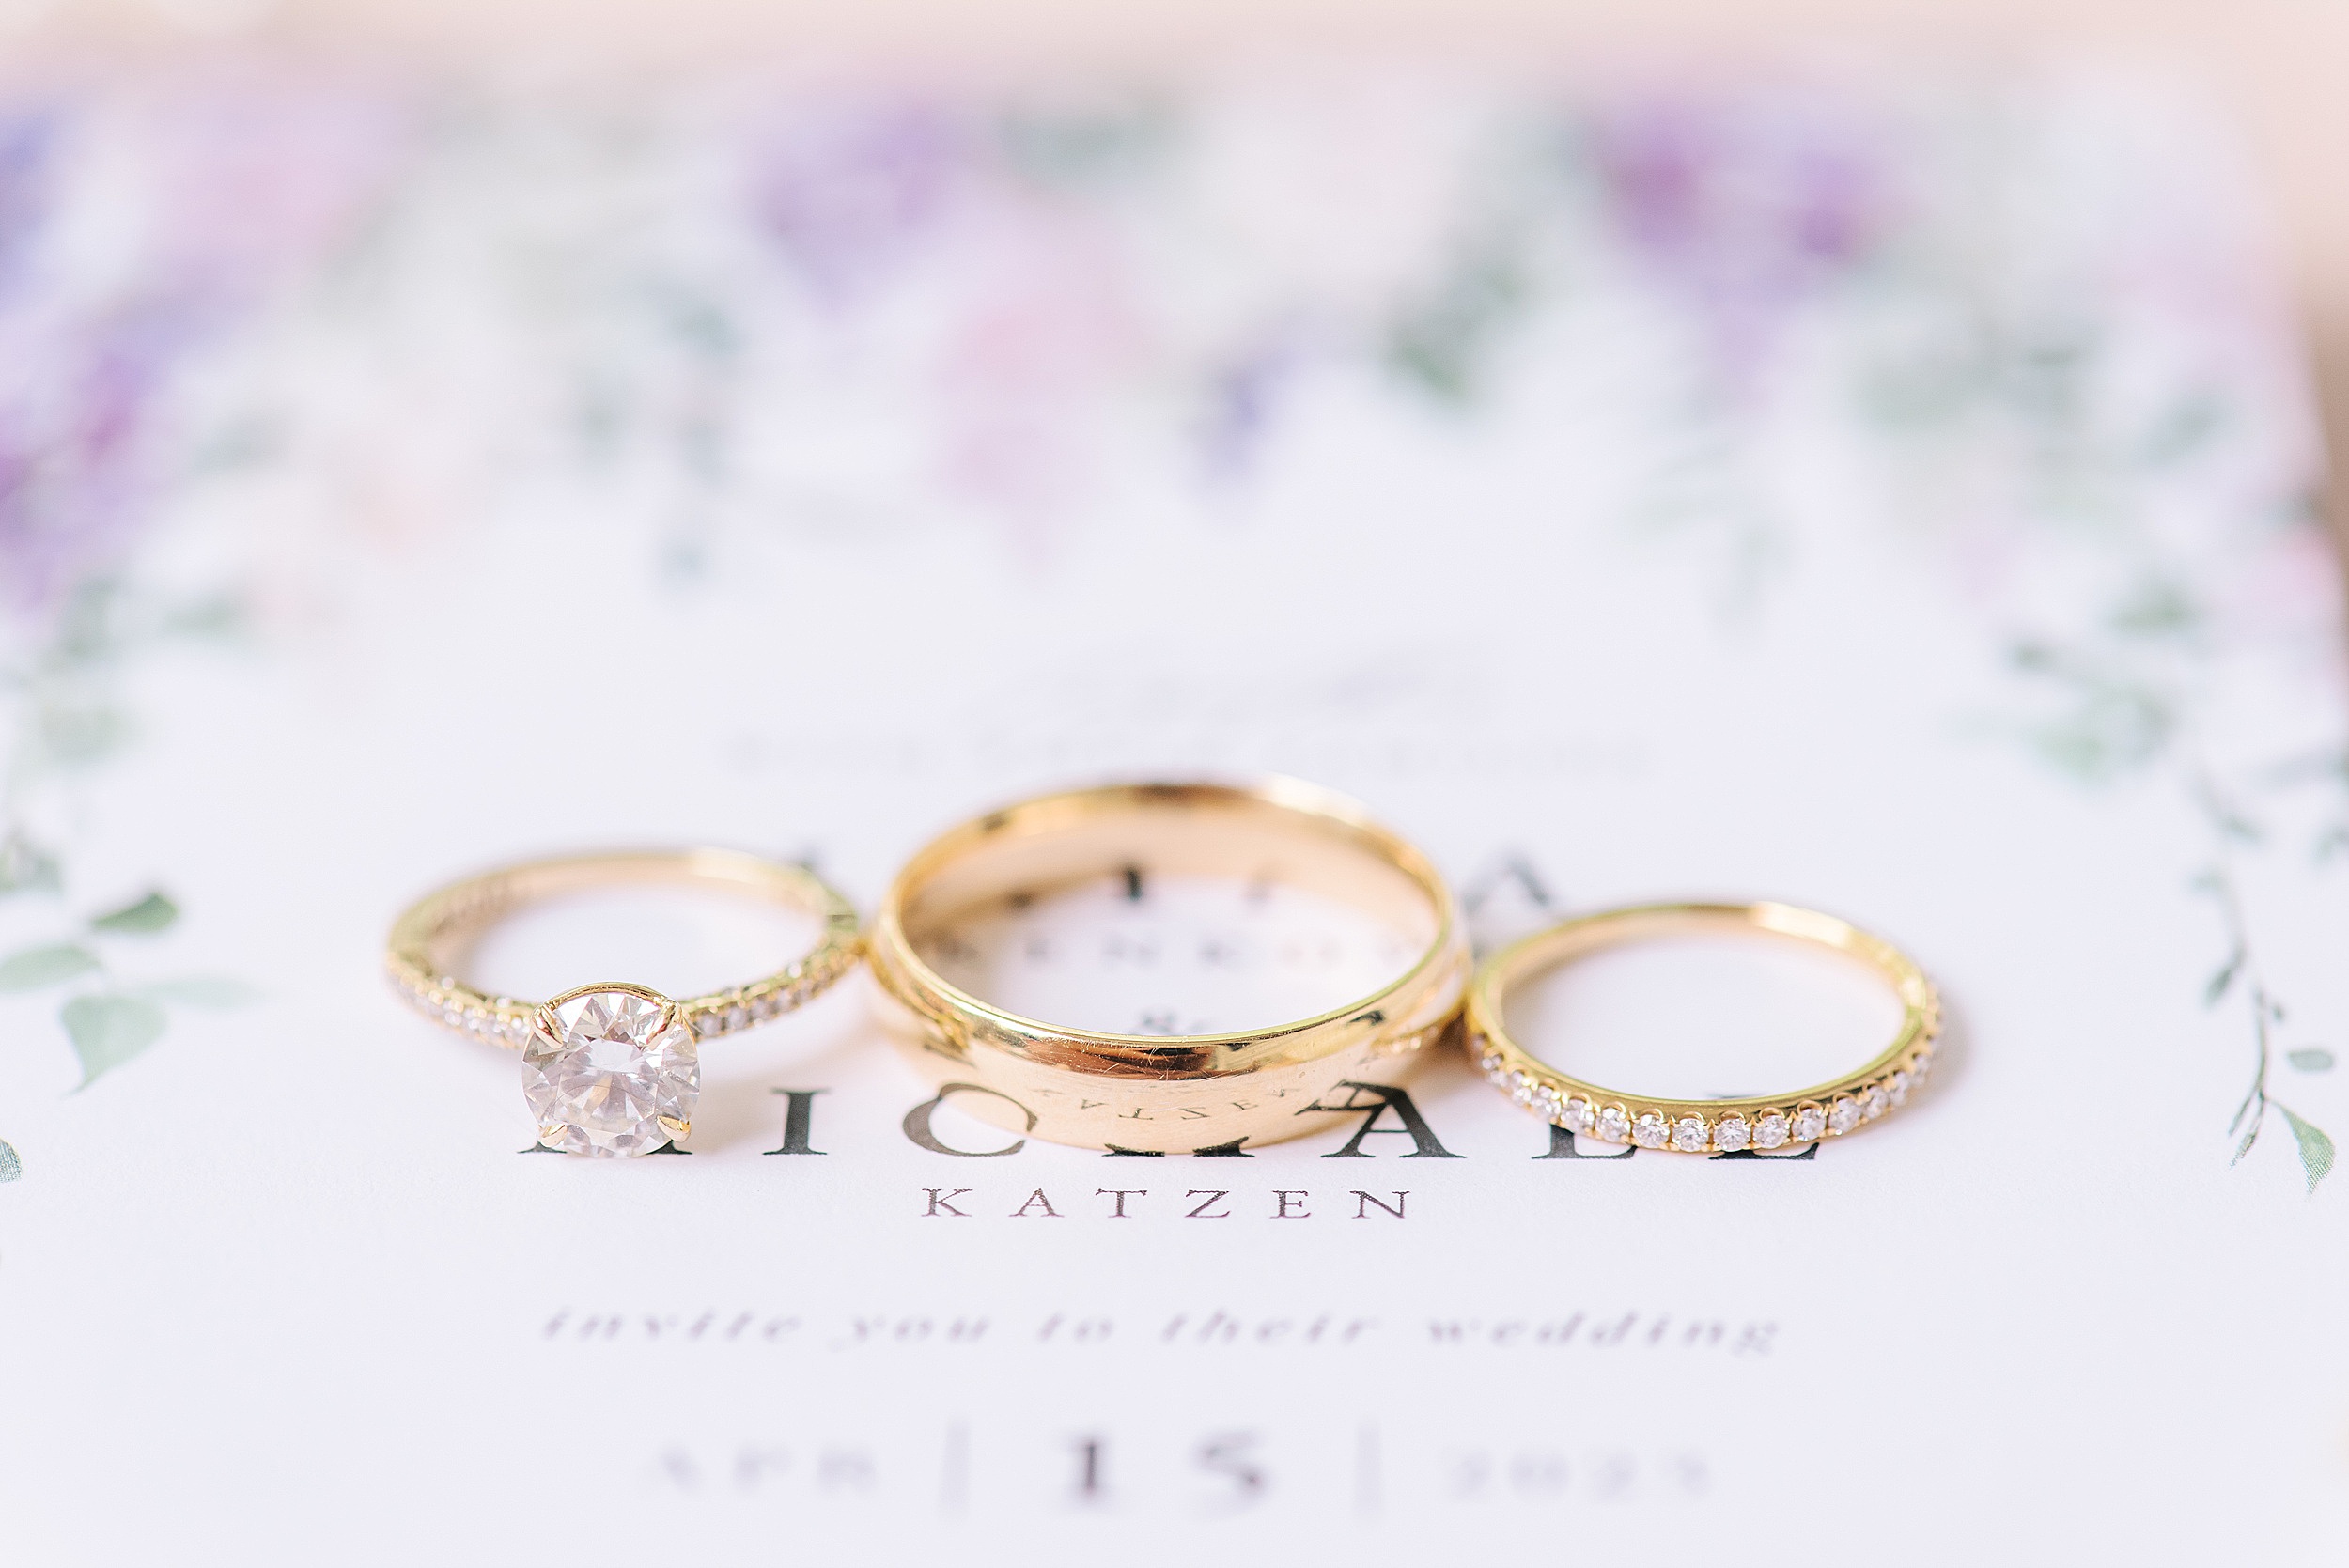 Details of three wedding bands sitting on an invitation